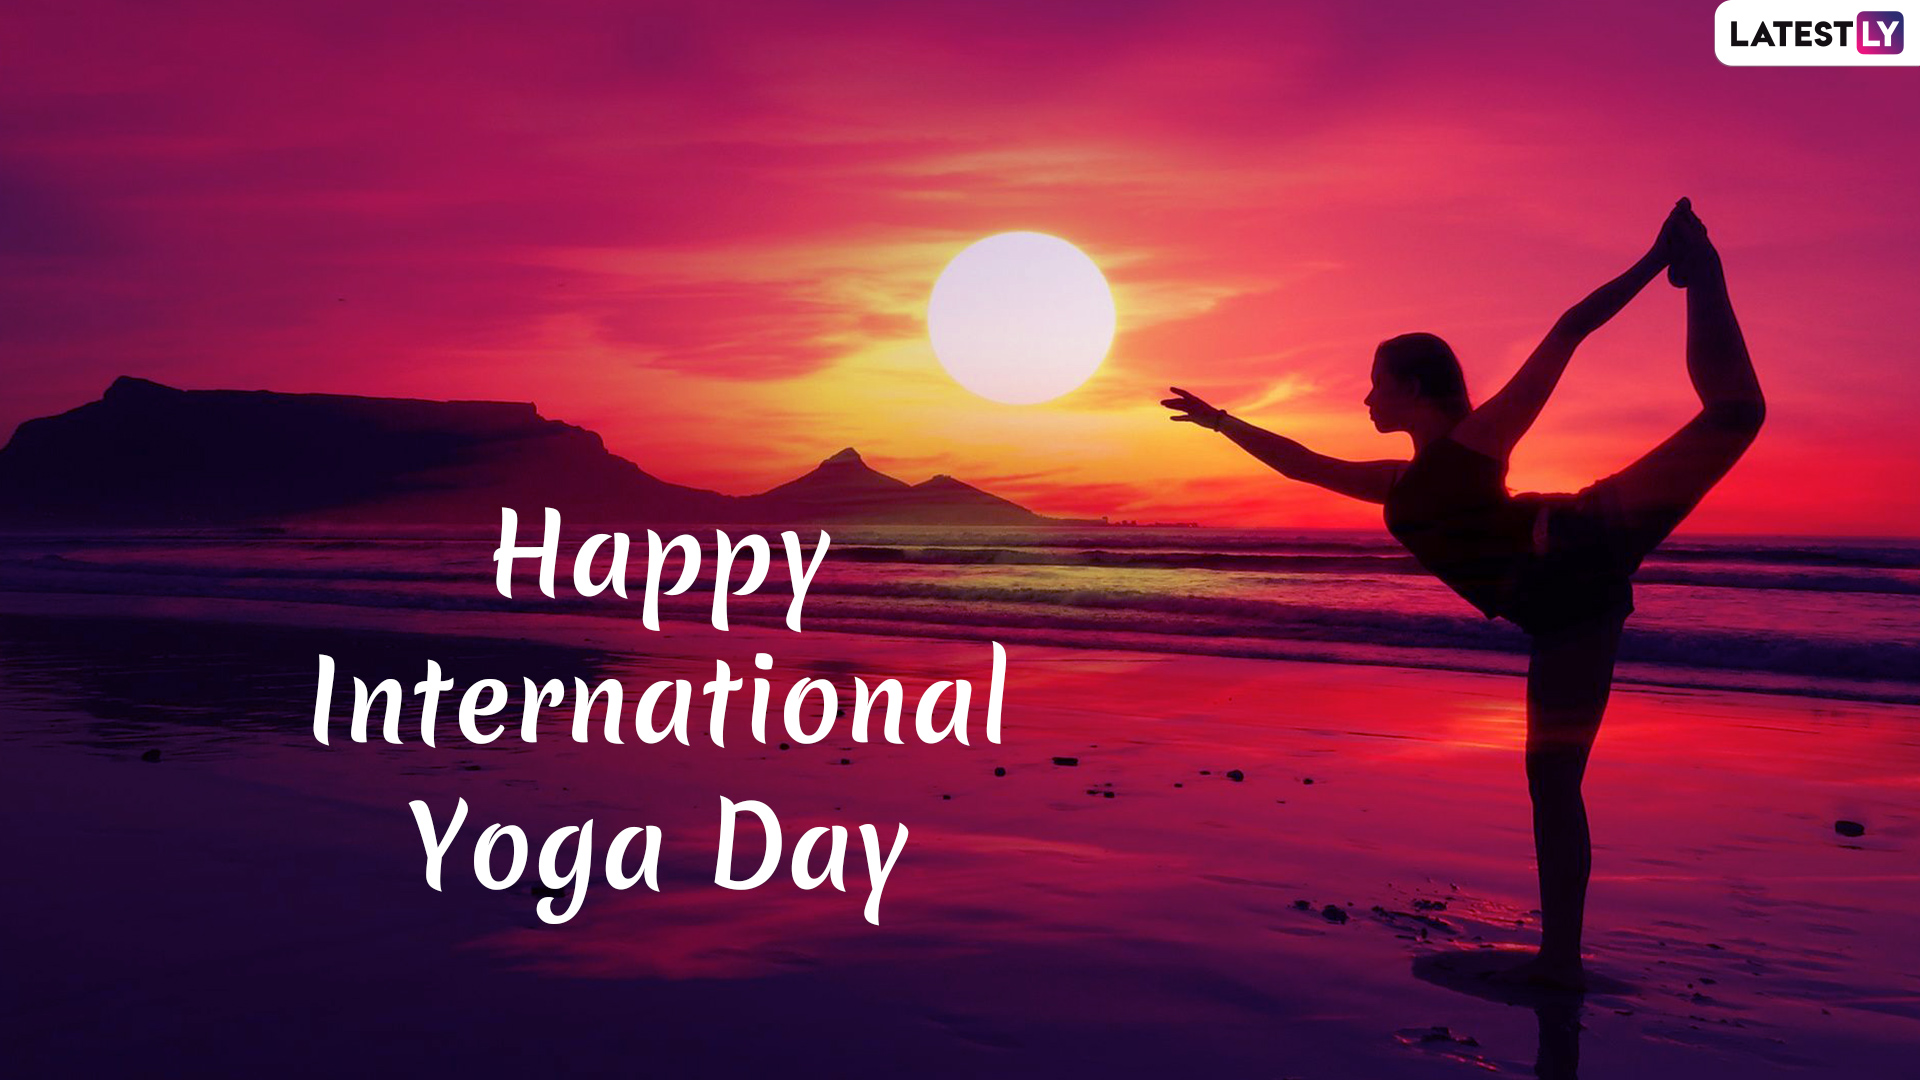 Quotes On Yoga Day